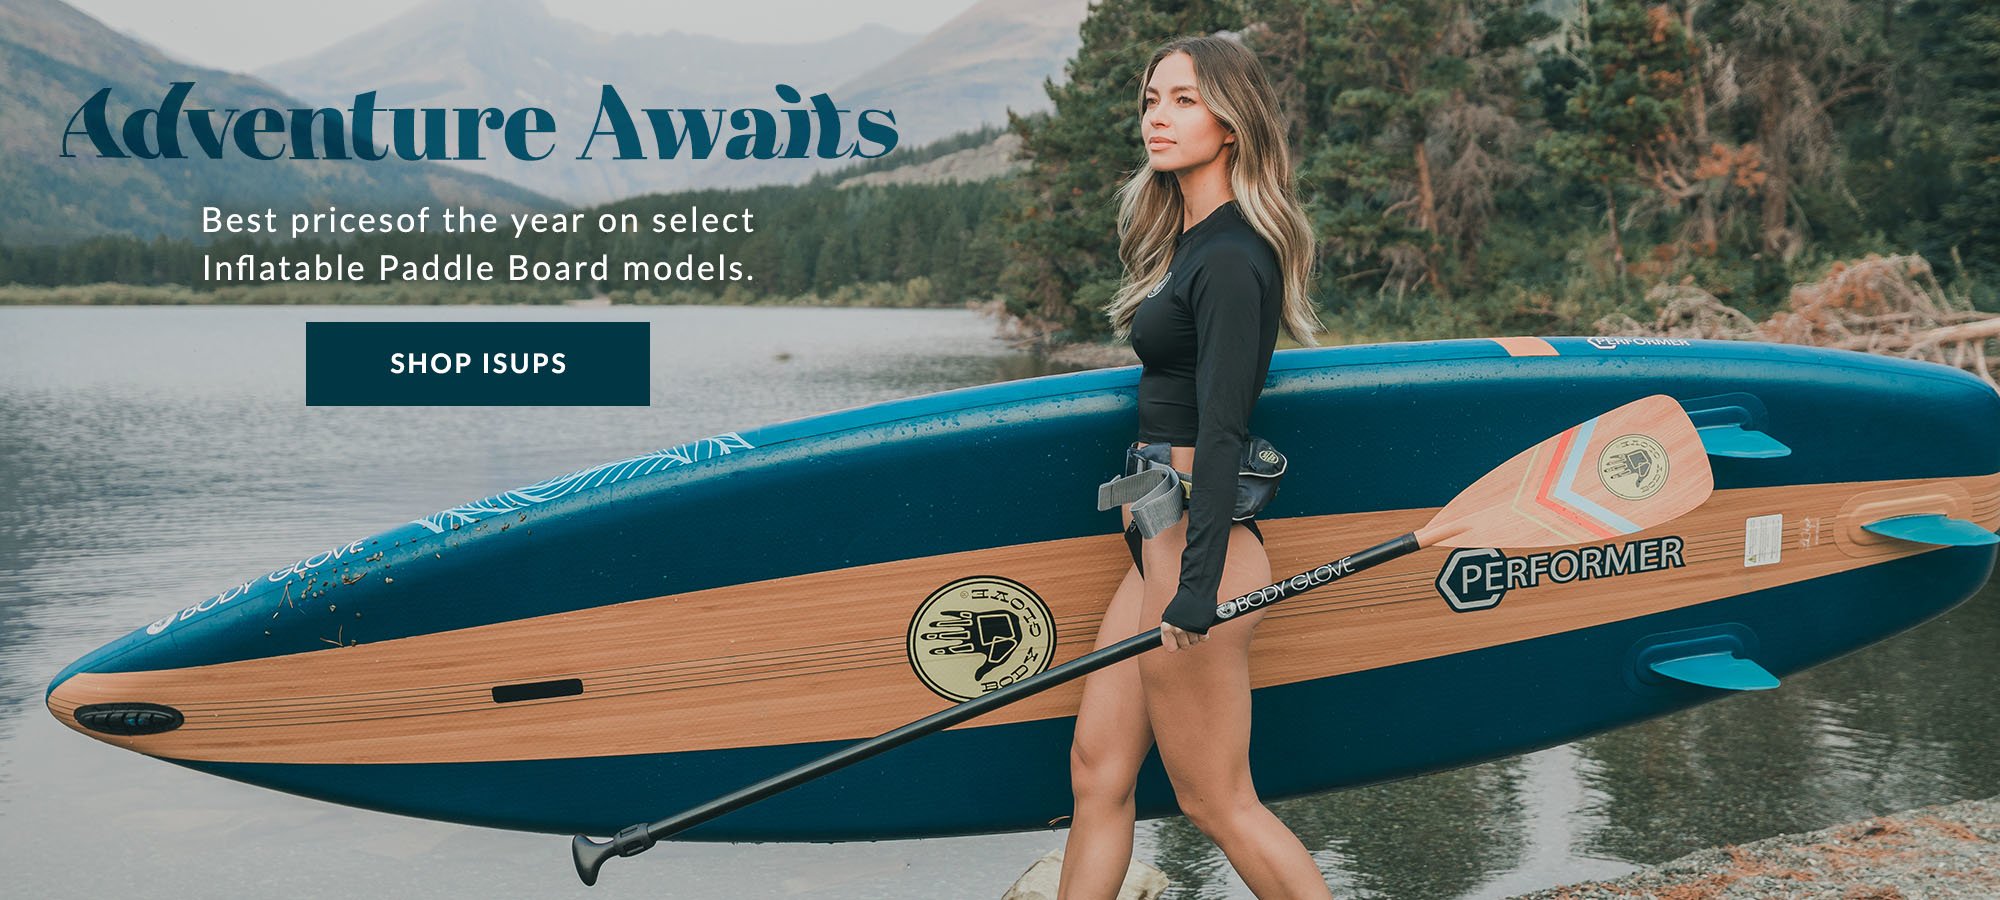 Adventure Ahead - Inflatable Paddle Boards - Best prices of the year - Shop Now